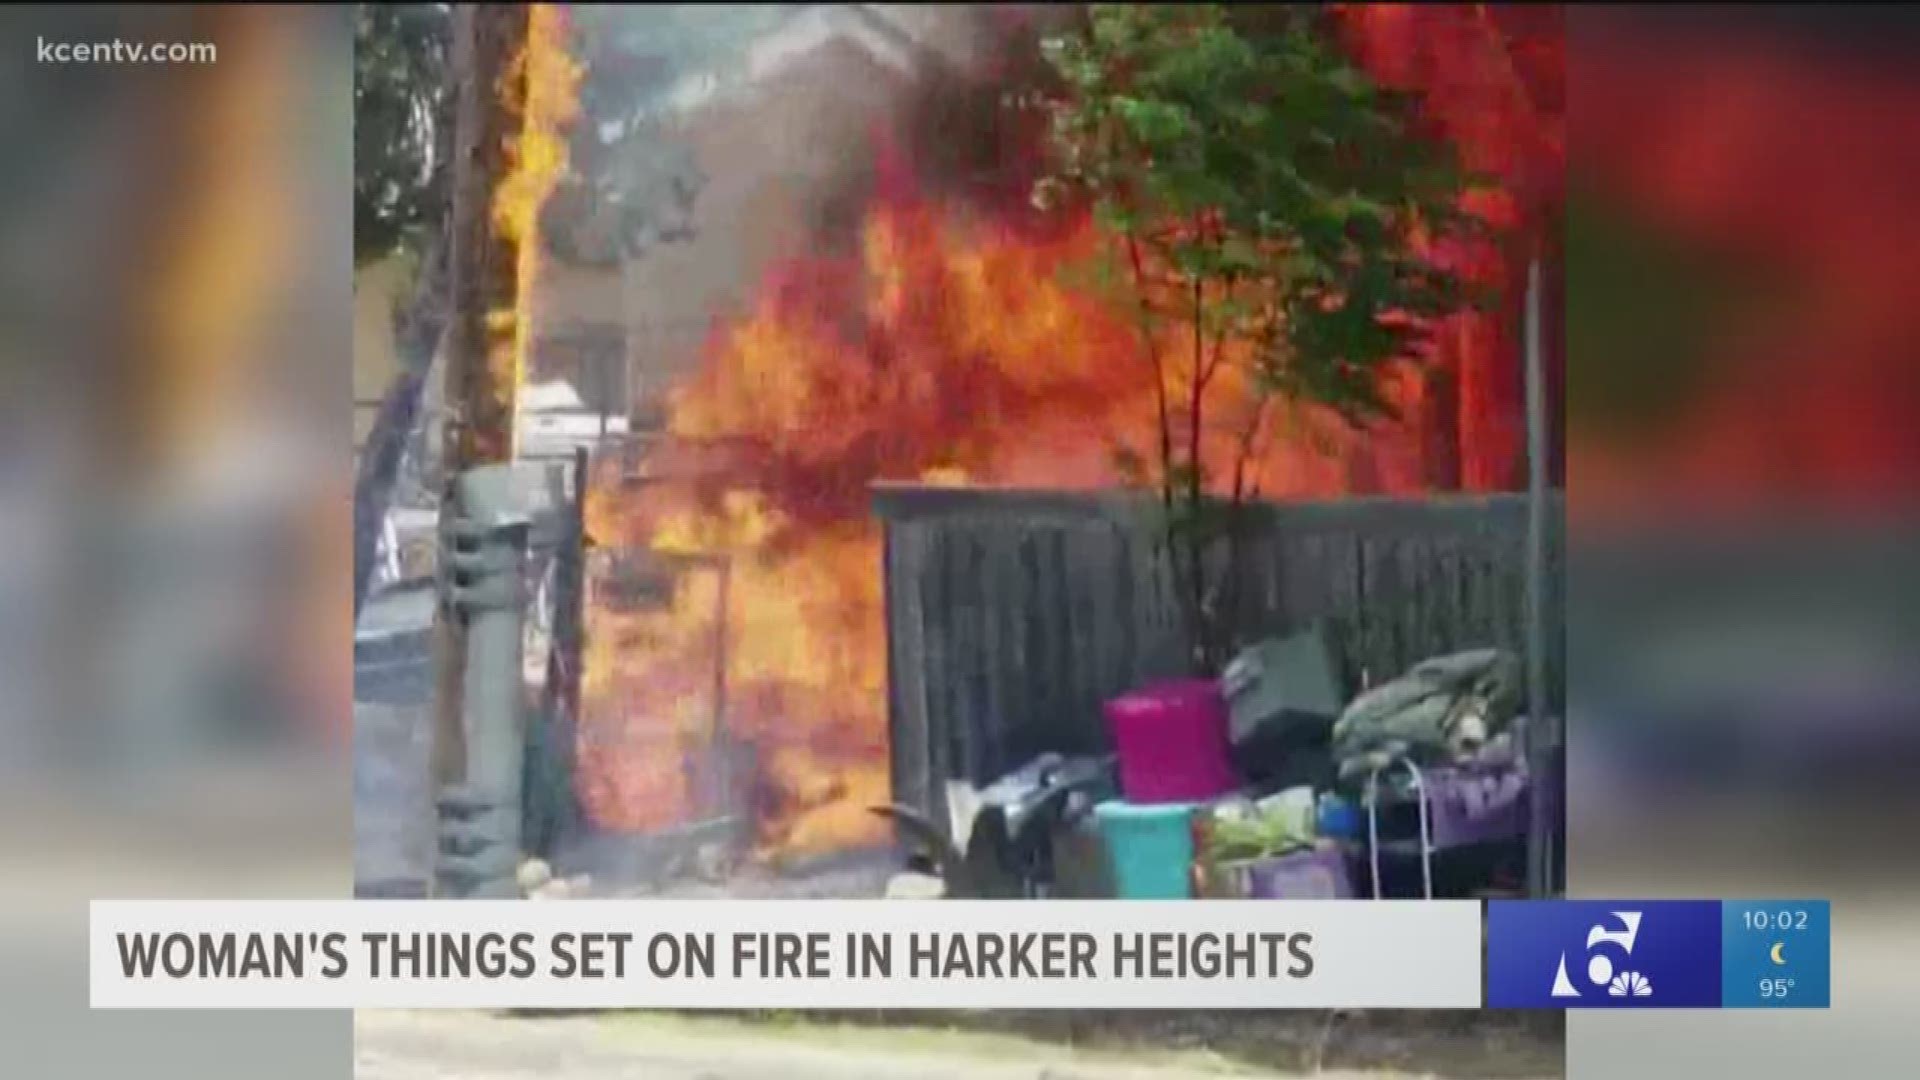 Police said a man set his girlfriend's stuff on fire in Harker Heights.